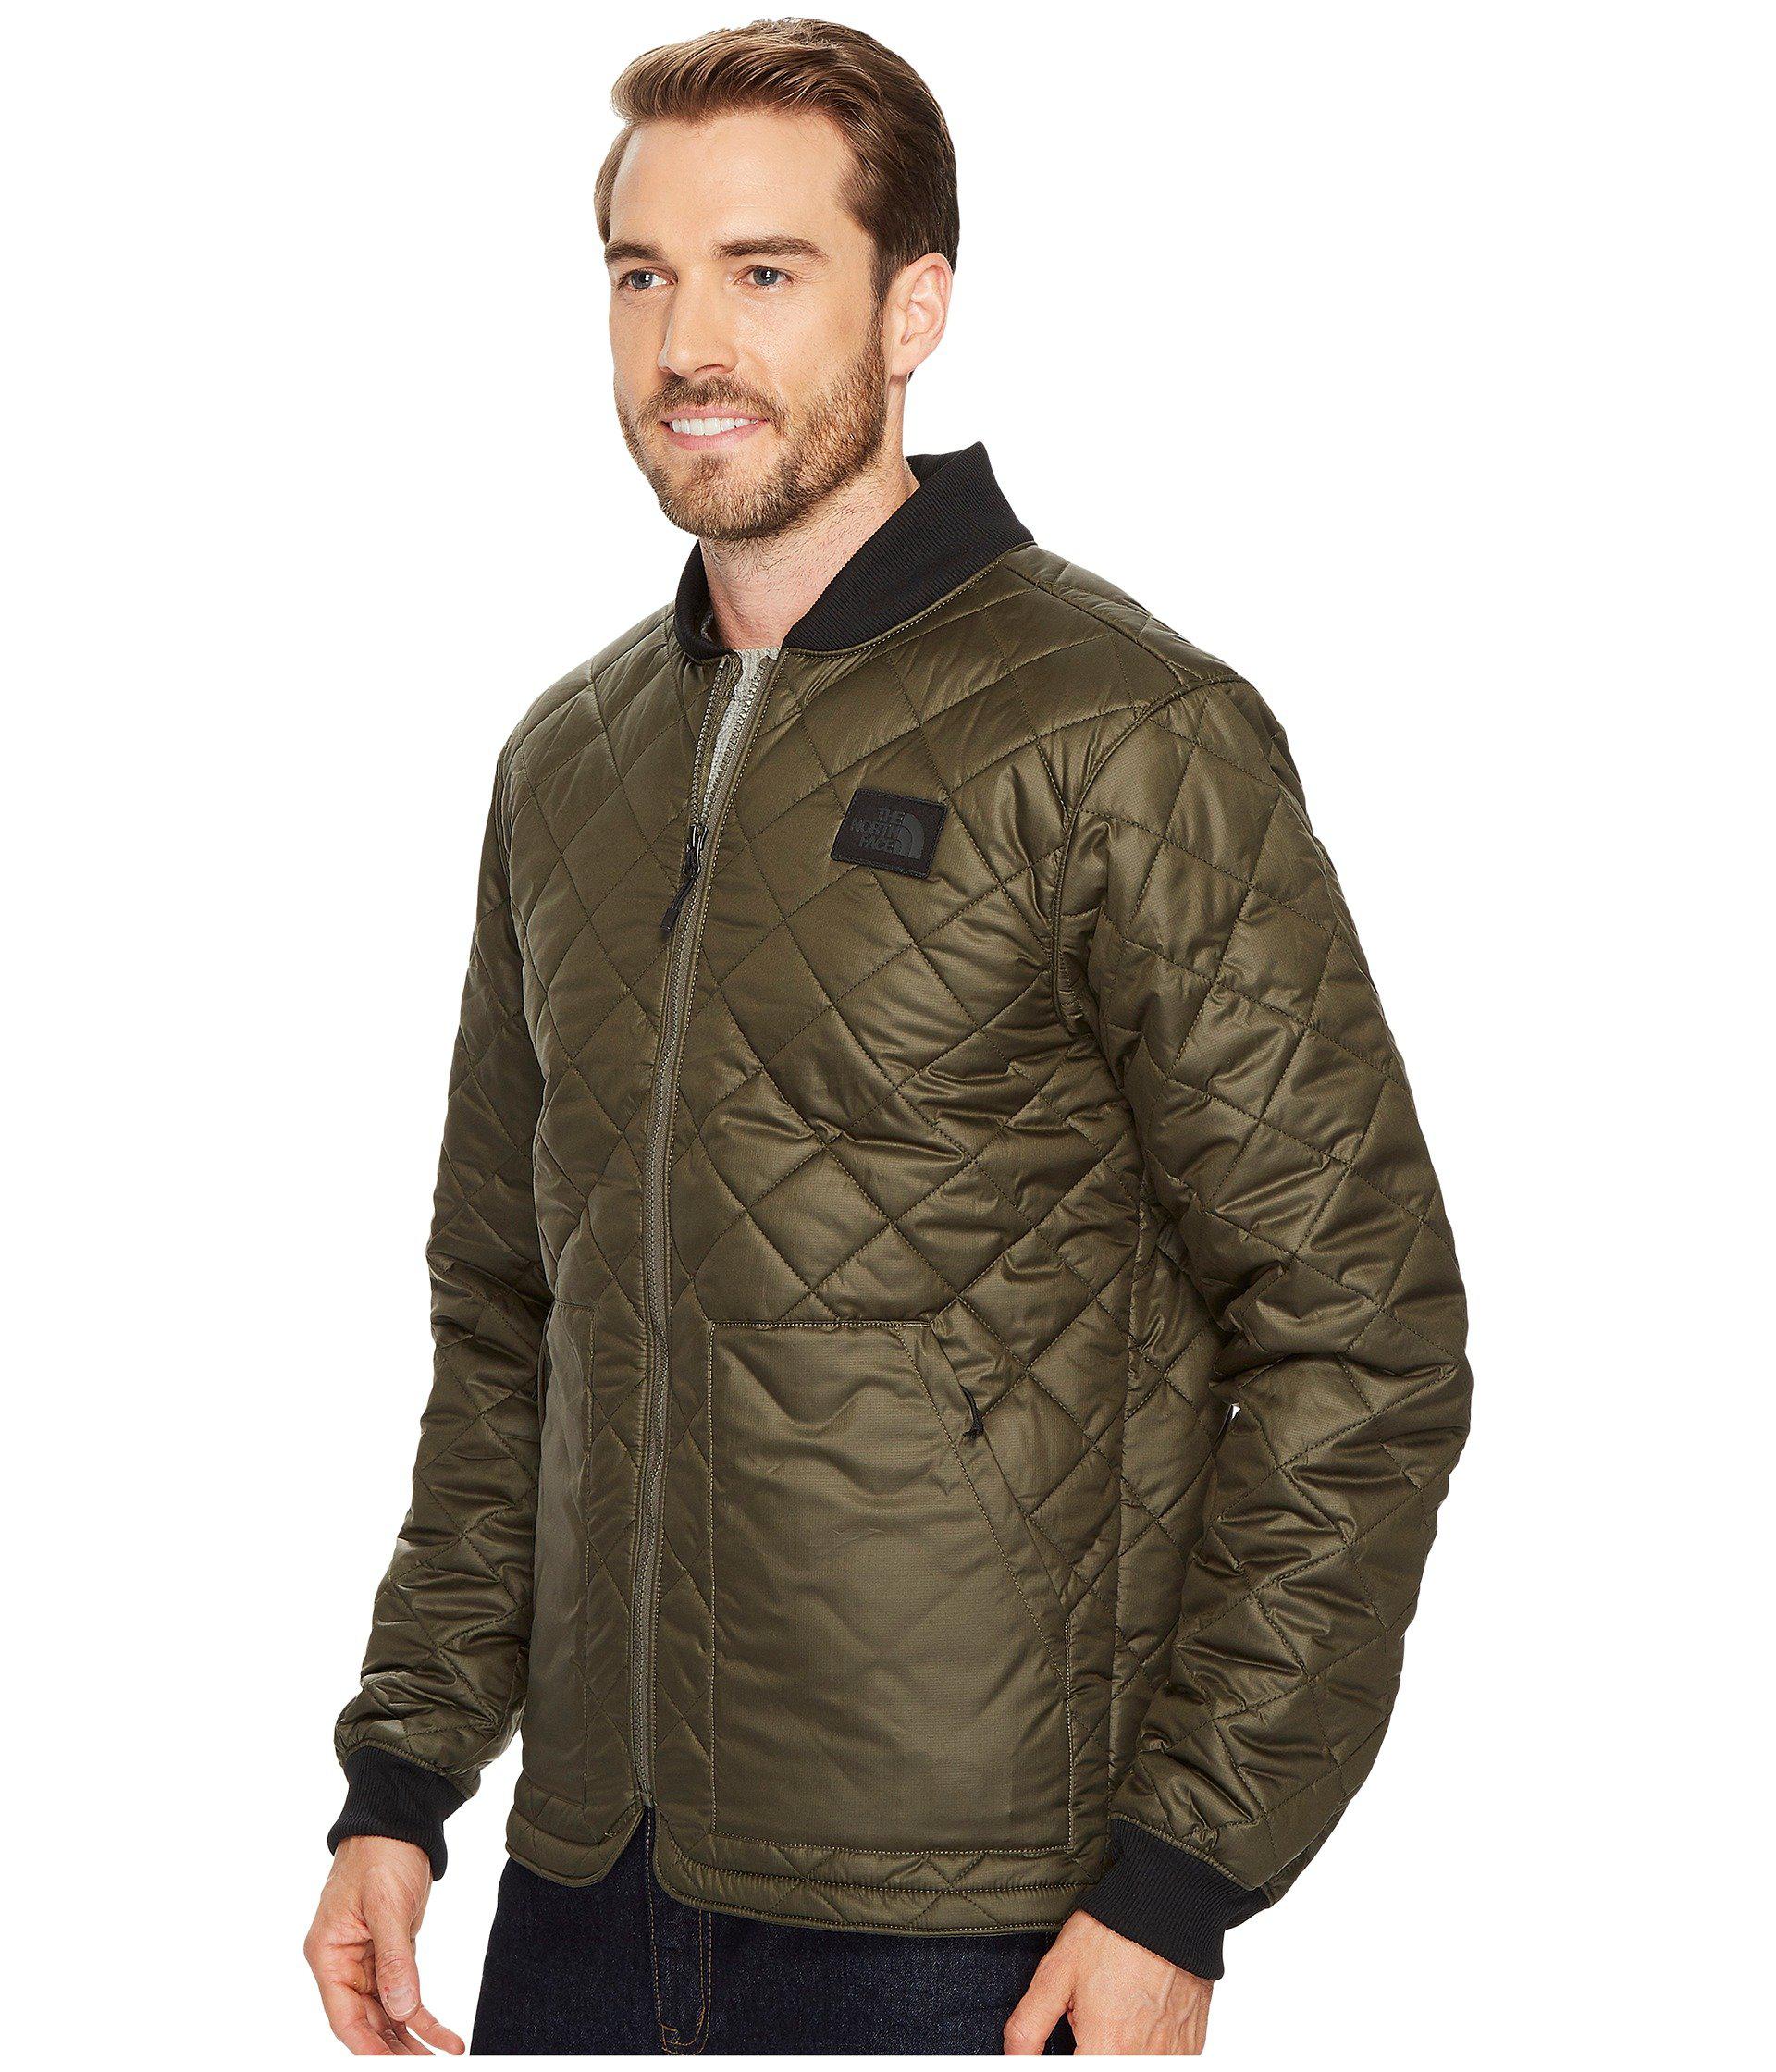 The North Face Synthetic Cuchillo Insulated Jacket in Green for Men - Lyst